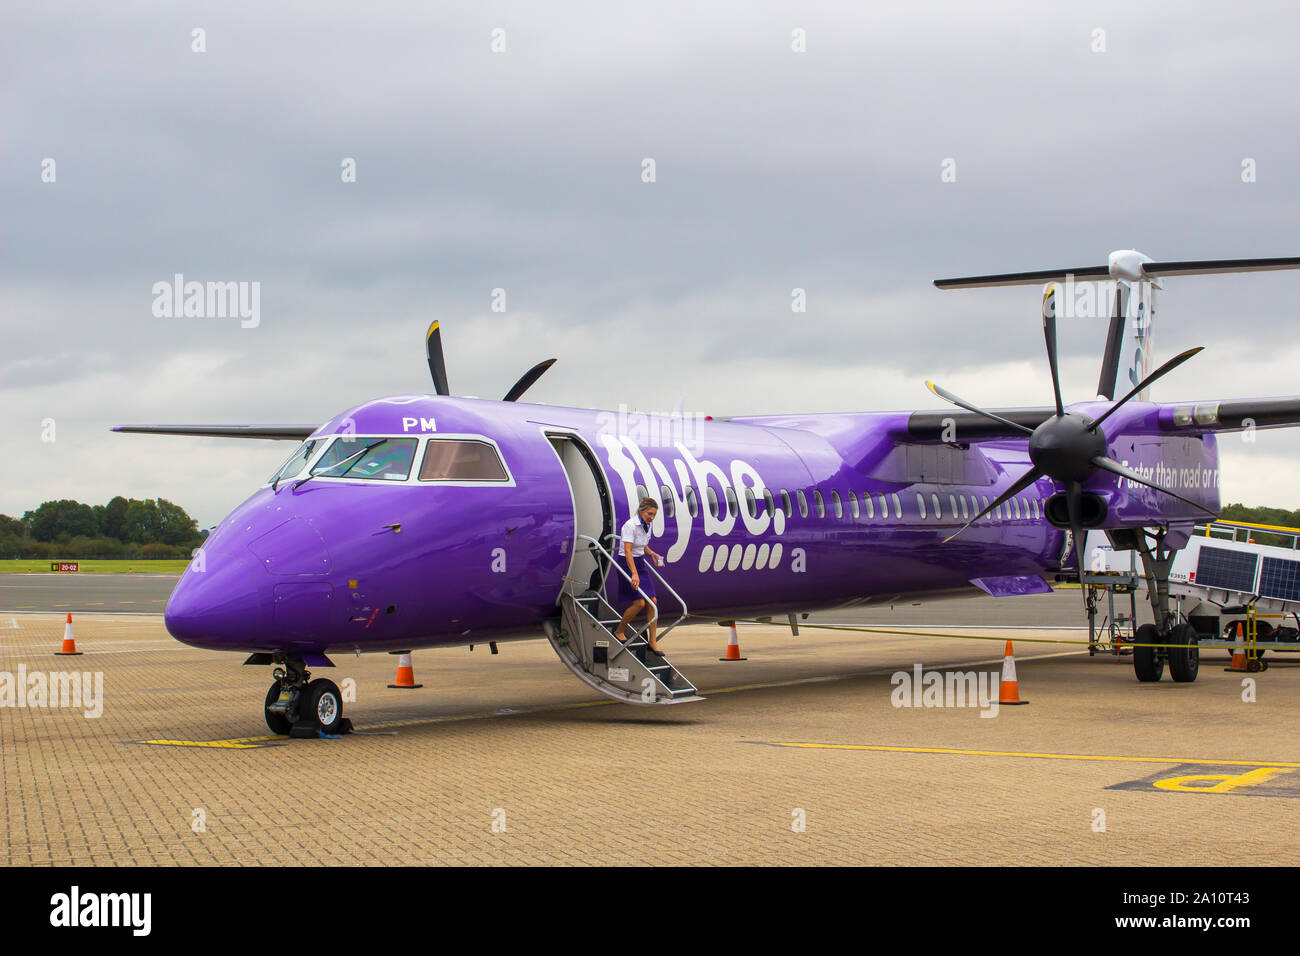 16 September 2019 A FlyBe Dash 8 Commercial Airliner with luggage and passenger handlers on the apron at Southampton City Airport in Hampshire England Stock Photo